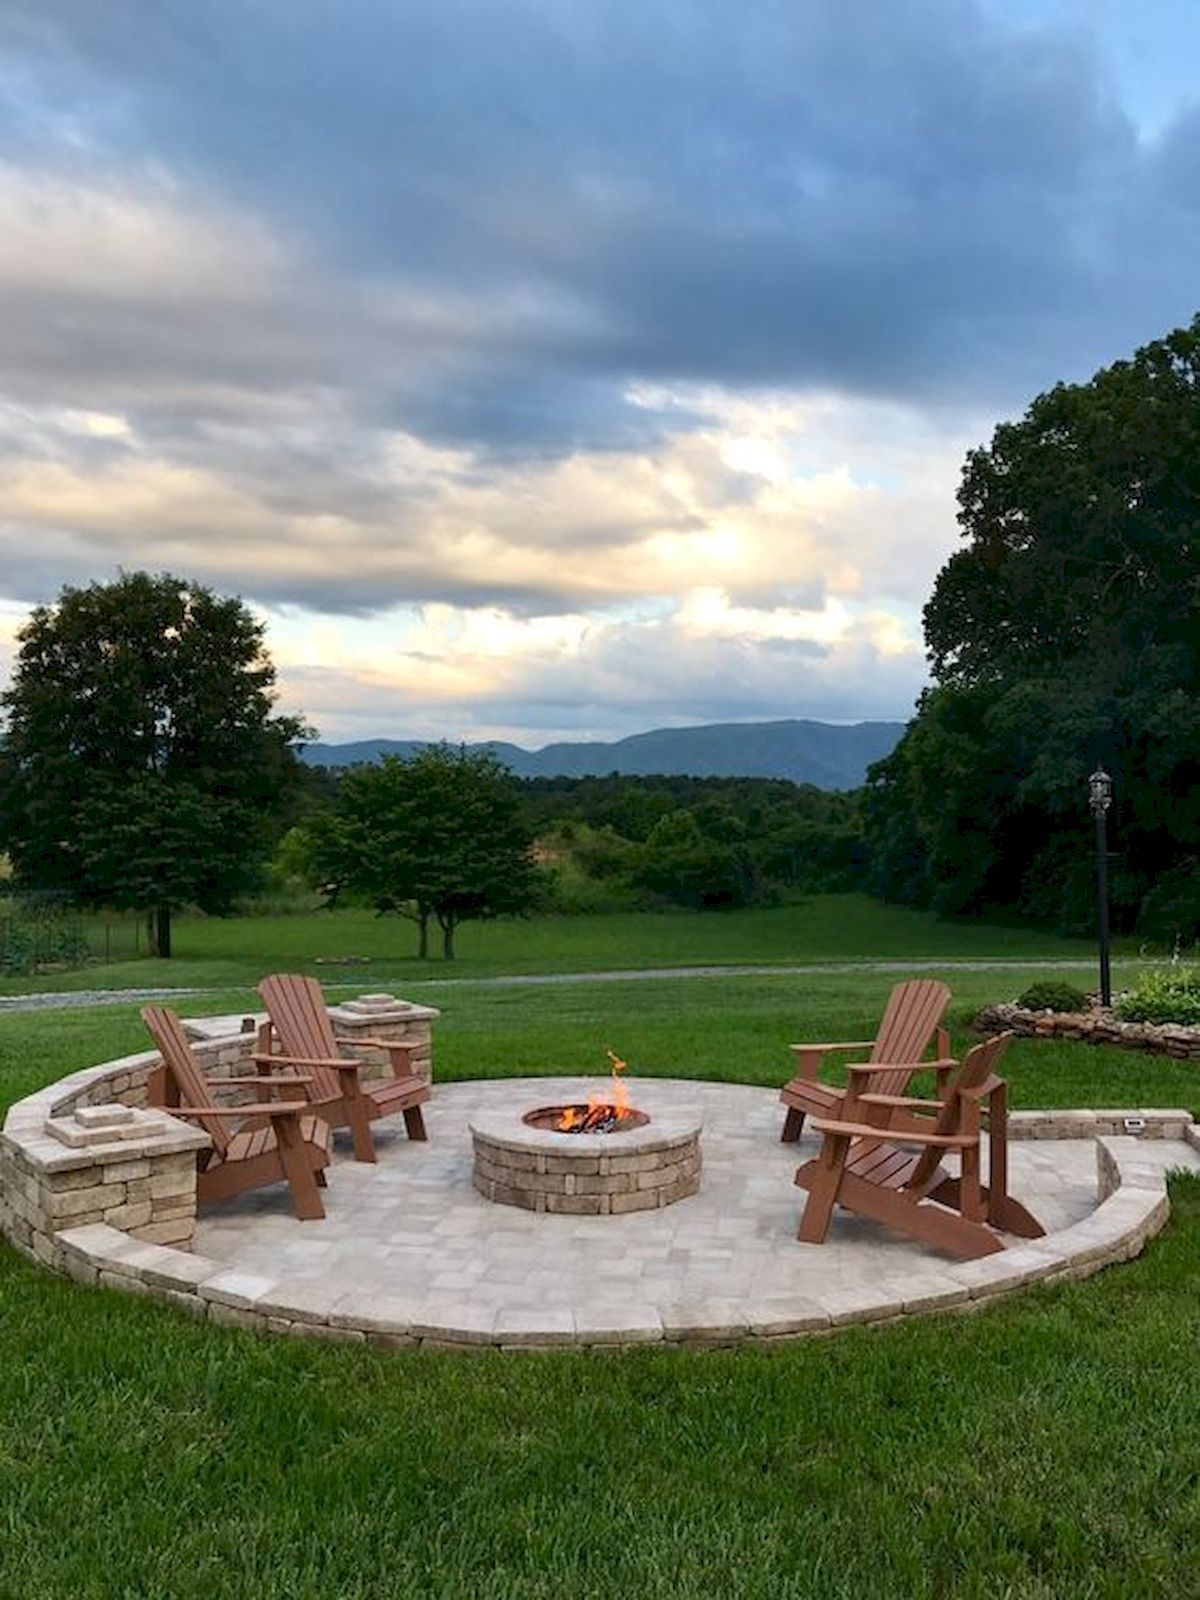 Inspiring Outdoor Fire Pit Design Ideas To Try45